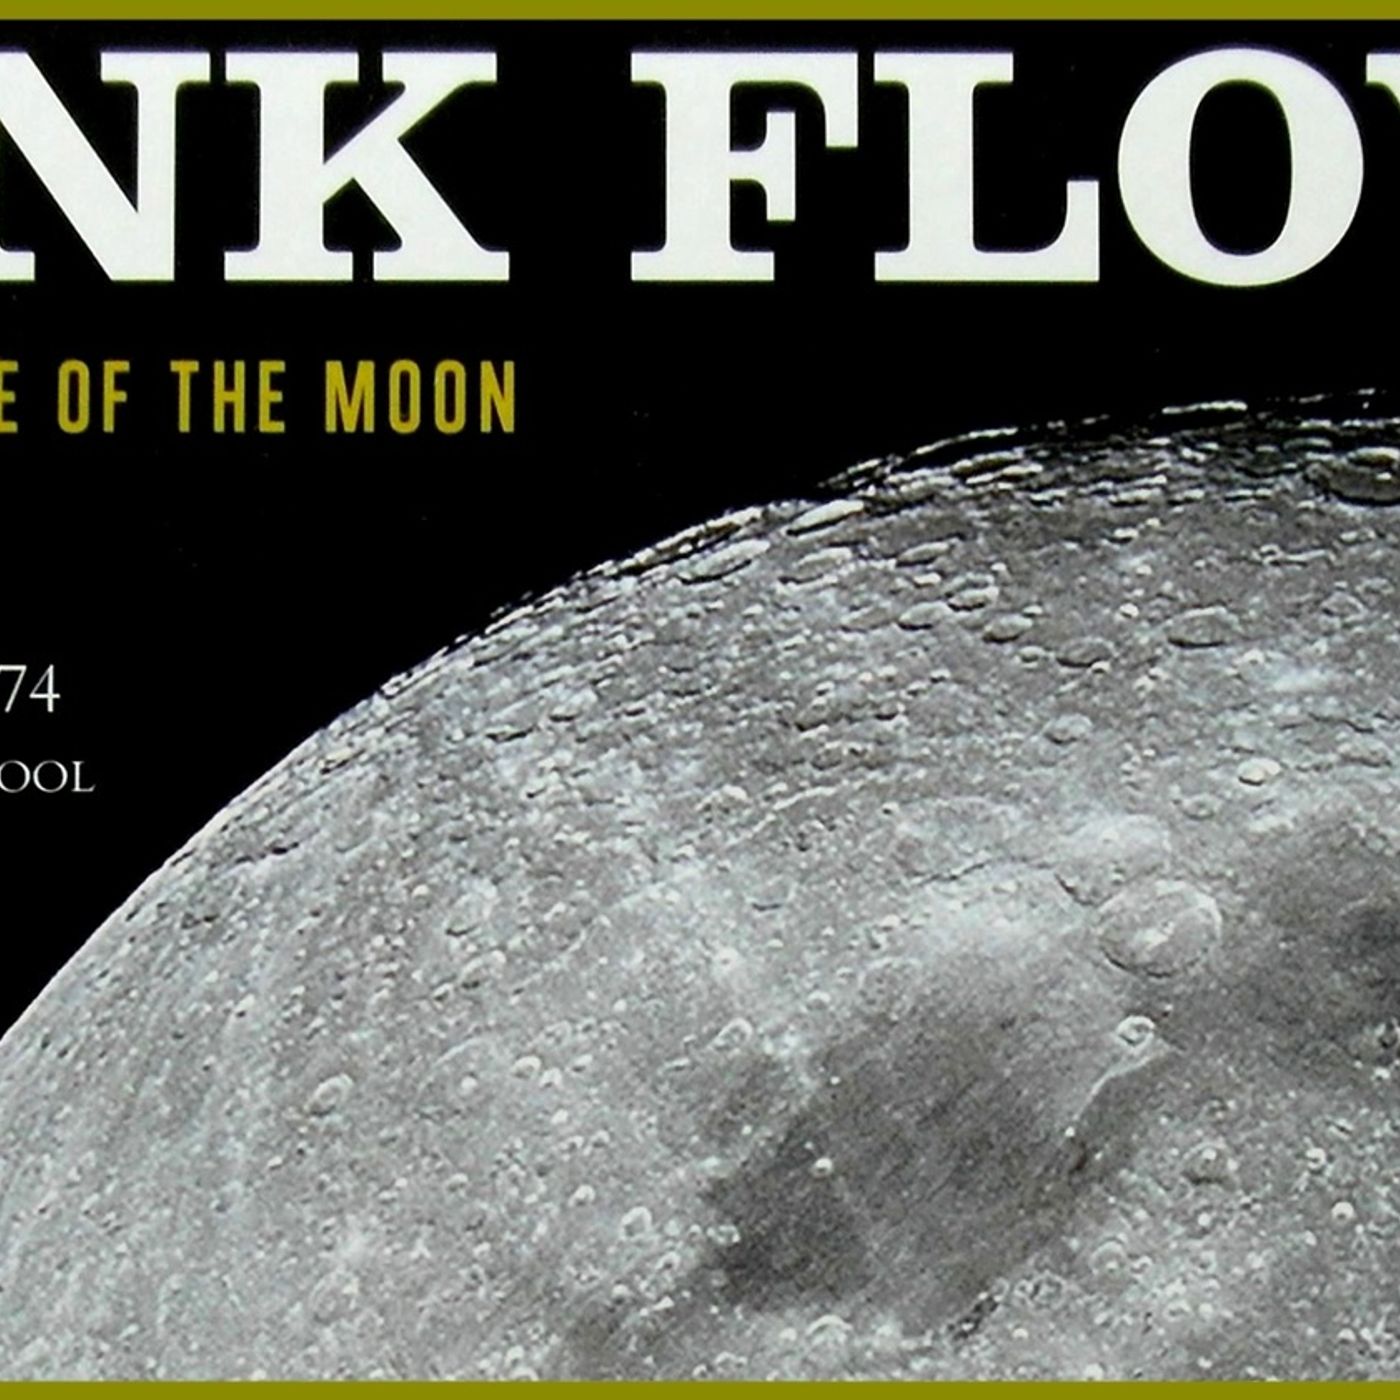 atualizando a minha playlist - ep 88 - Pink Floyd – The Dark Side Of The Moon (Wembley November 17, 1974) (Live At The Empire Pool)